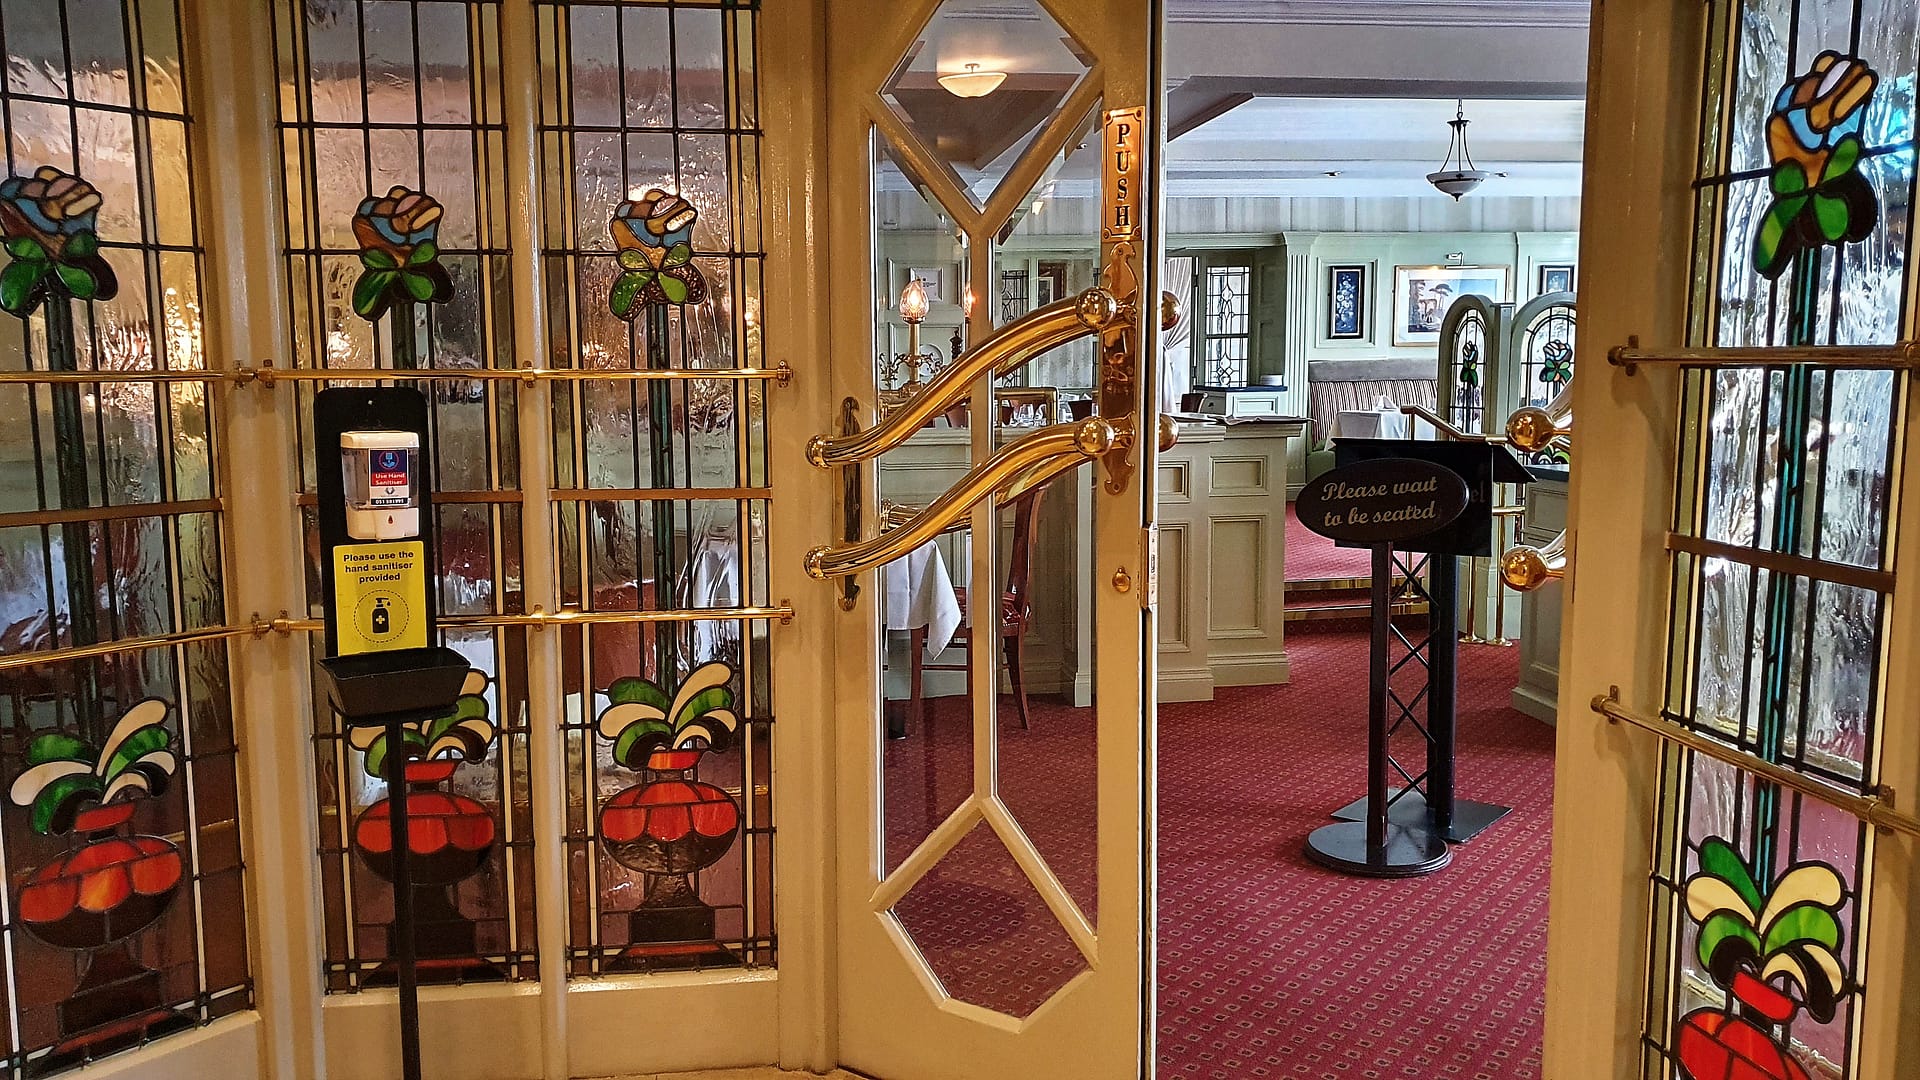 Entrance to the Bianconi Restaurant in the Granville Hotel